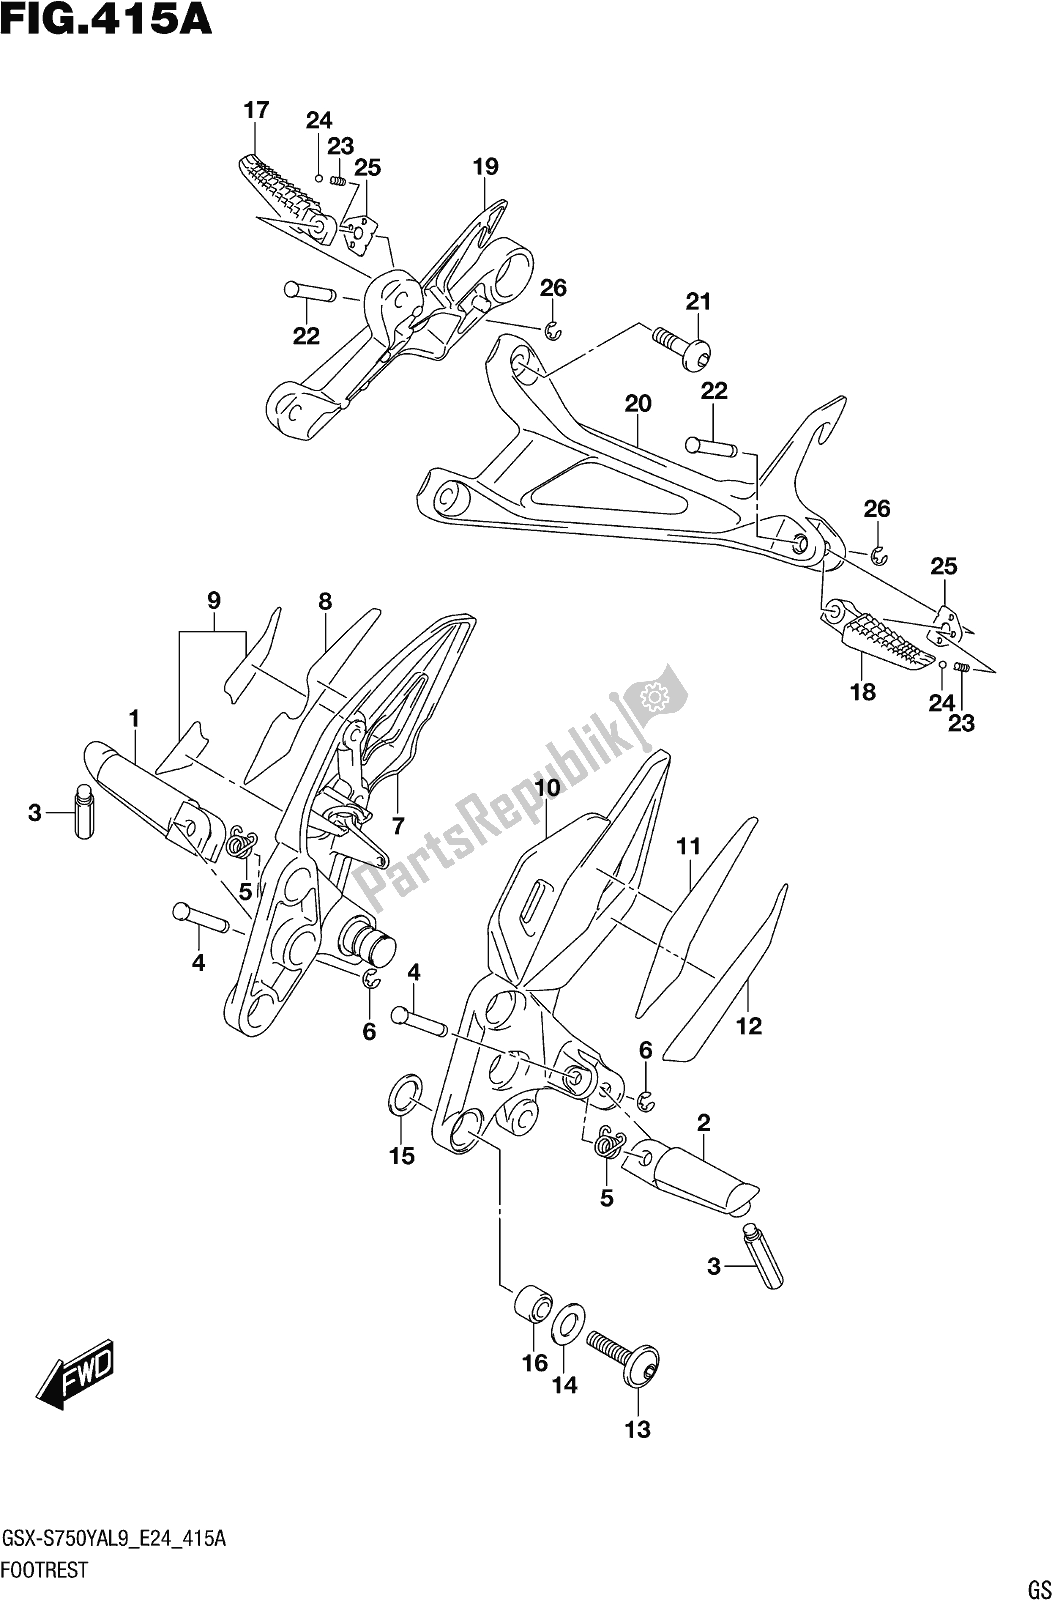 All parts for the Fig. 415a Footrest of the Suzuki Gsx-s 750 YA 2019